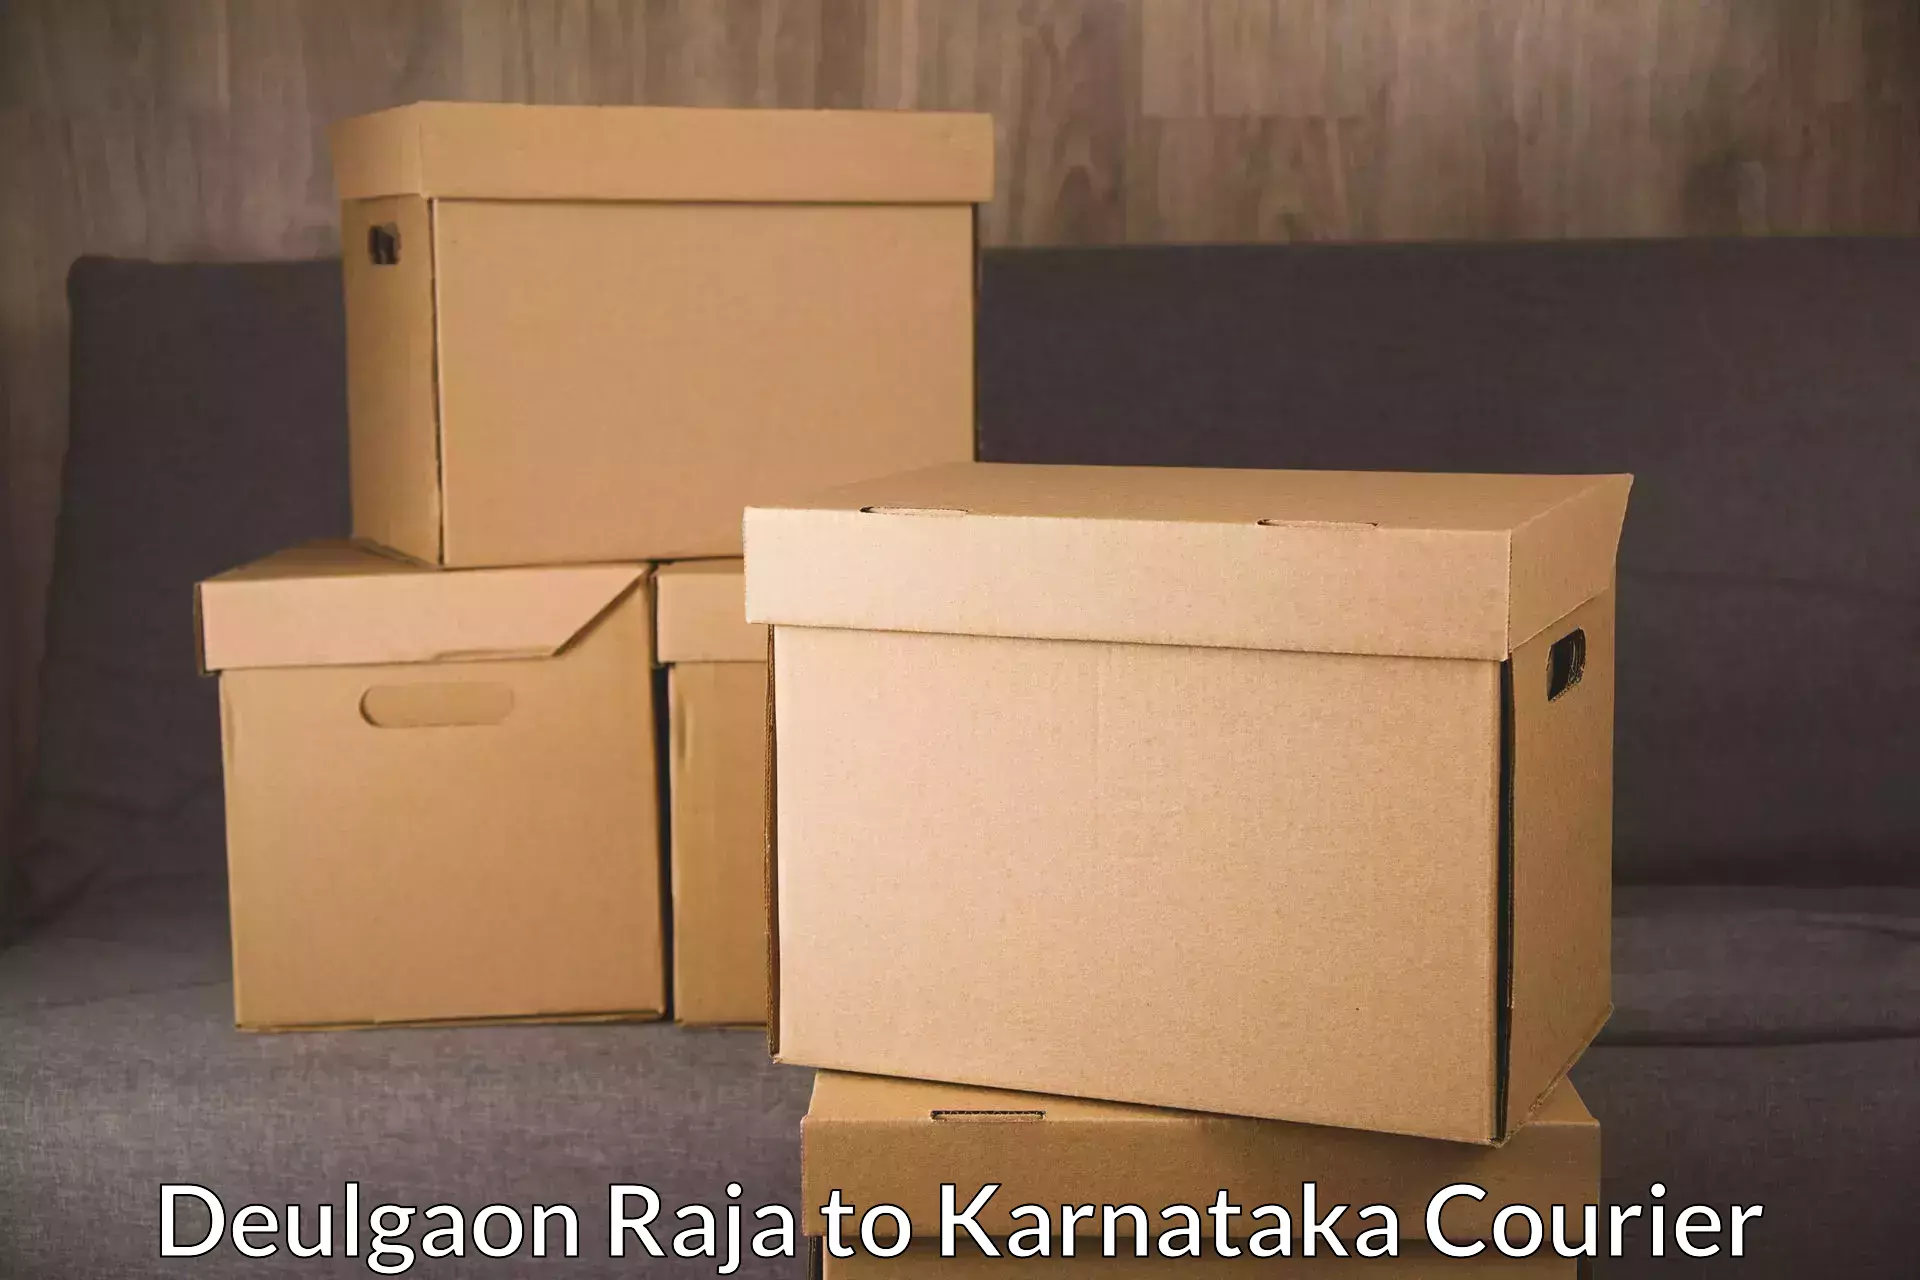 High-capacity courier solutions Deulgaon Raja to Bantwal